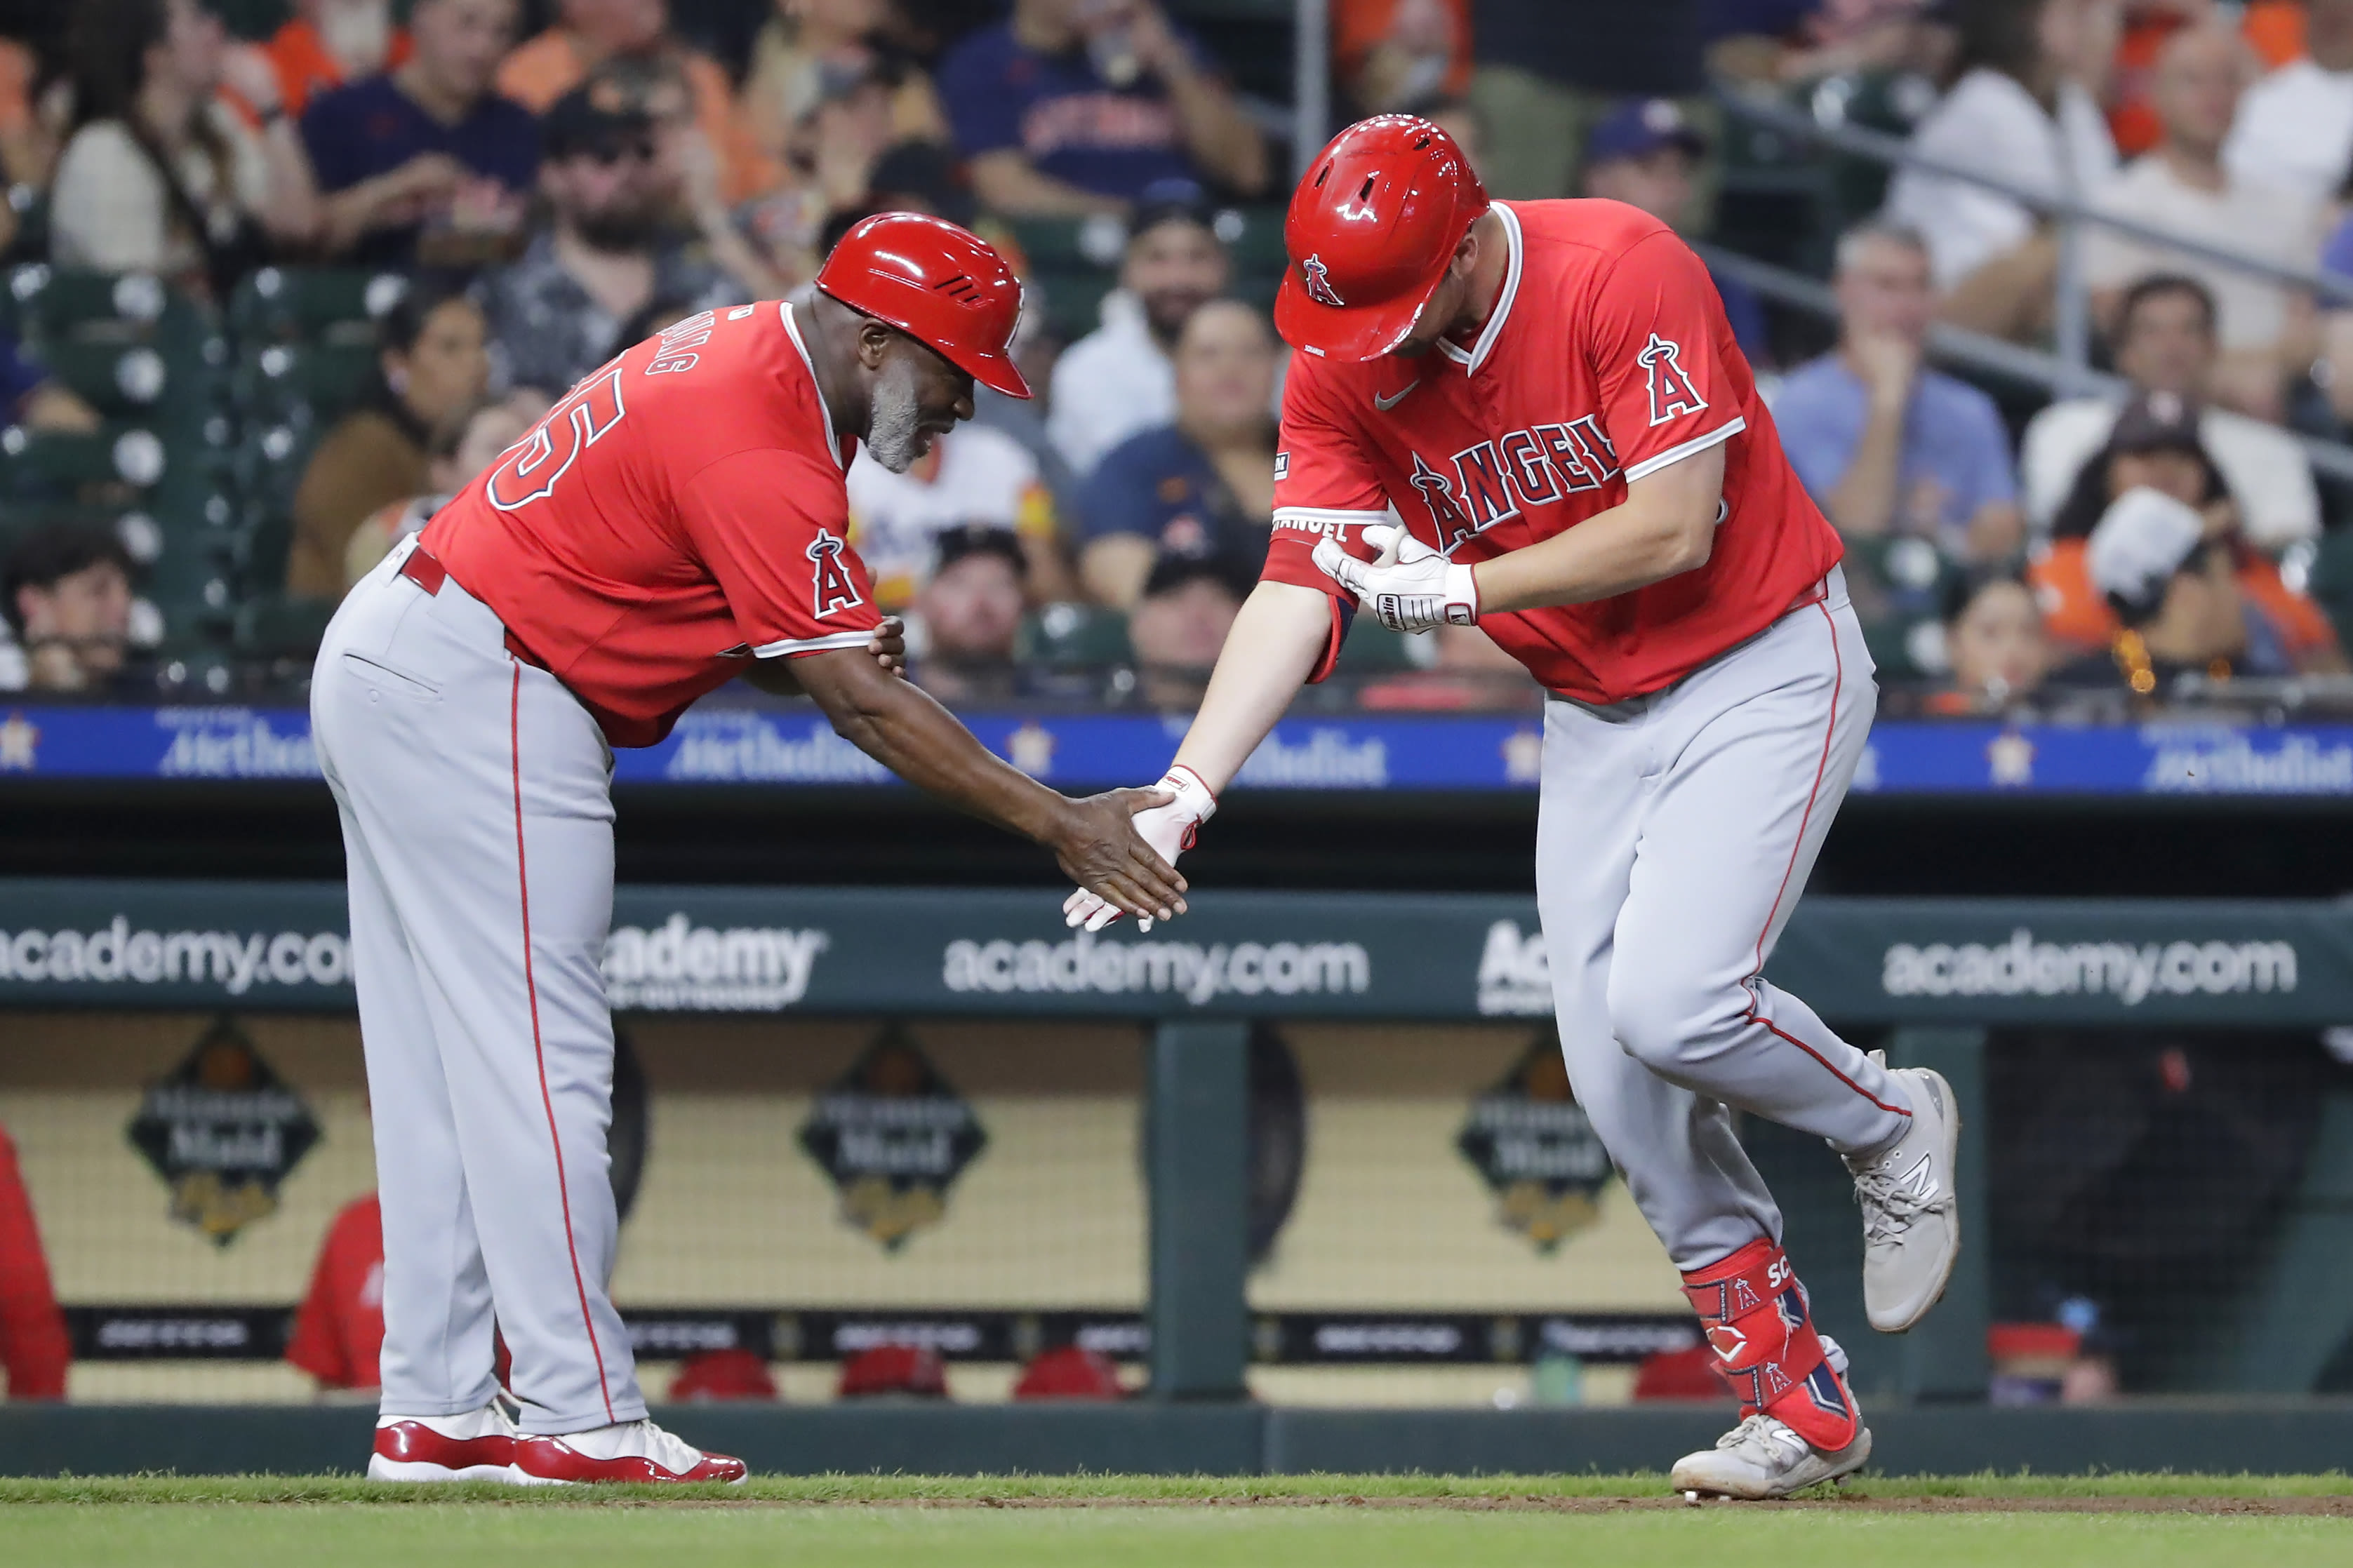 Big fifth inning leads Angels past Astros